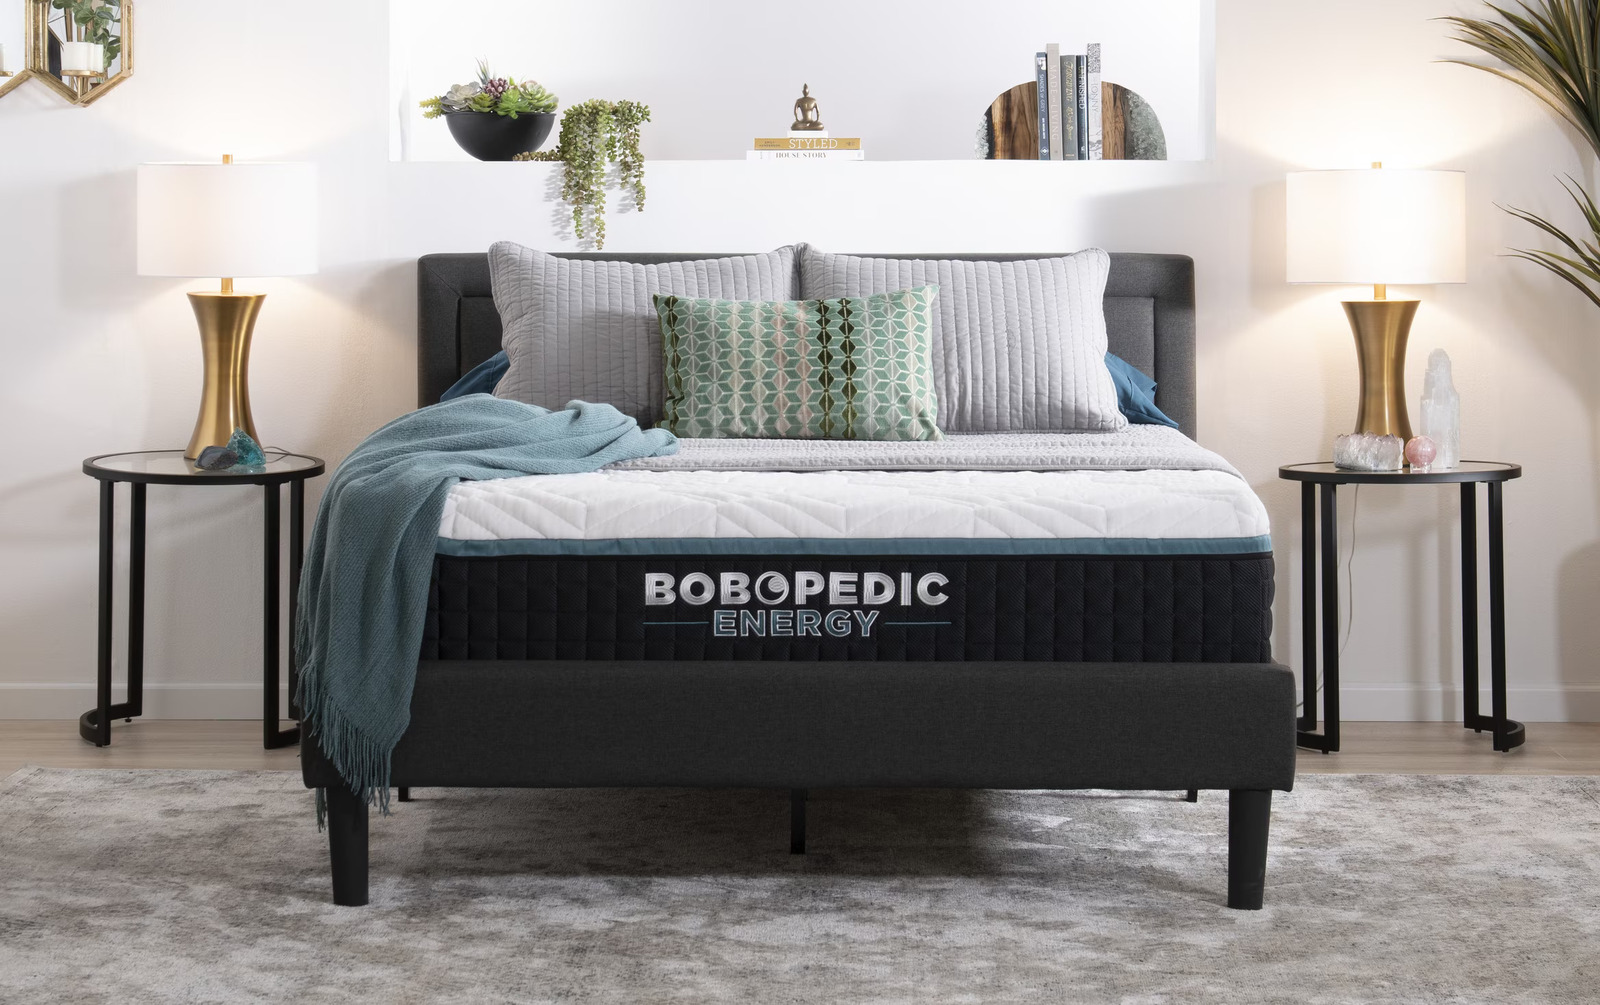 Bob-O-Pedic Review: Is It Worth The Money?